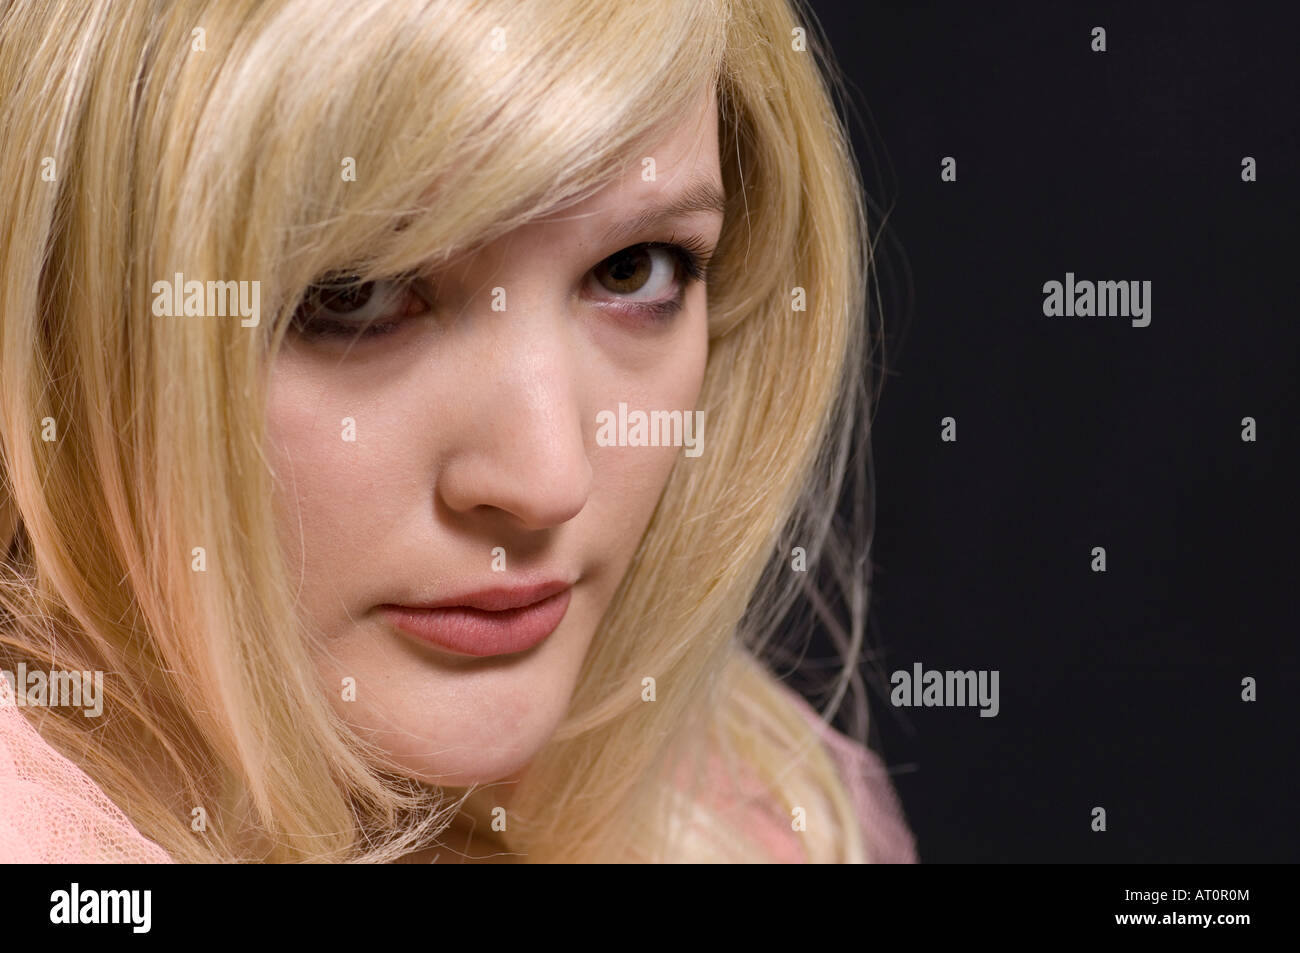 Upset blonde haired woman Stock Photo